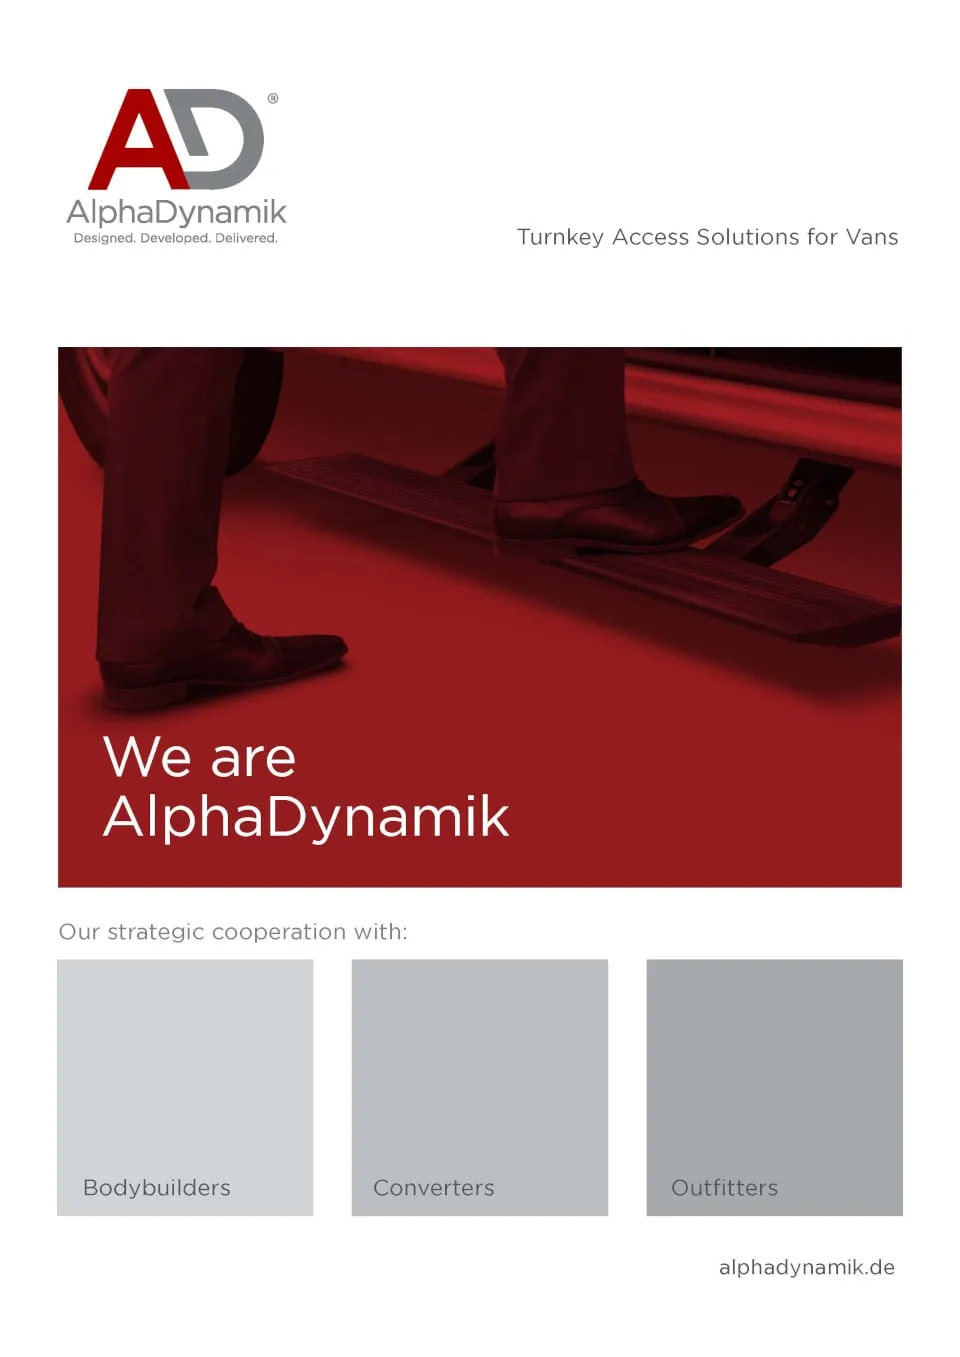 Turnkey access solutions for vans. Fleet solutions design, development, and delivery by AlphaDynamik